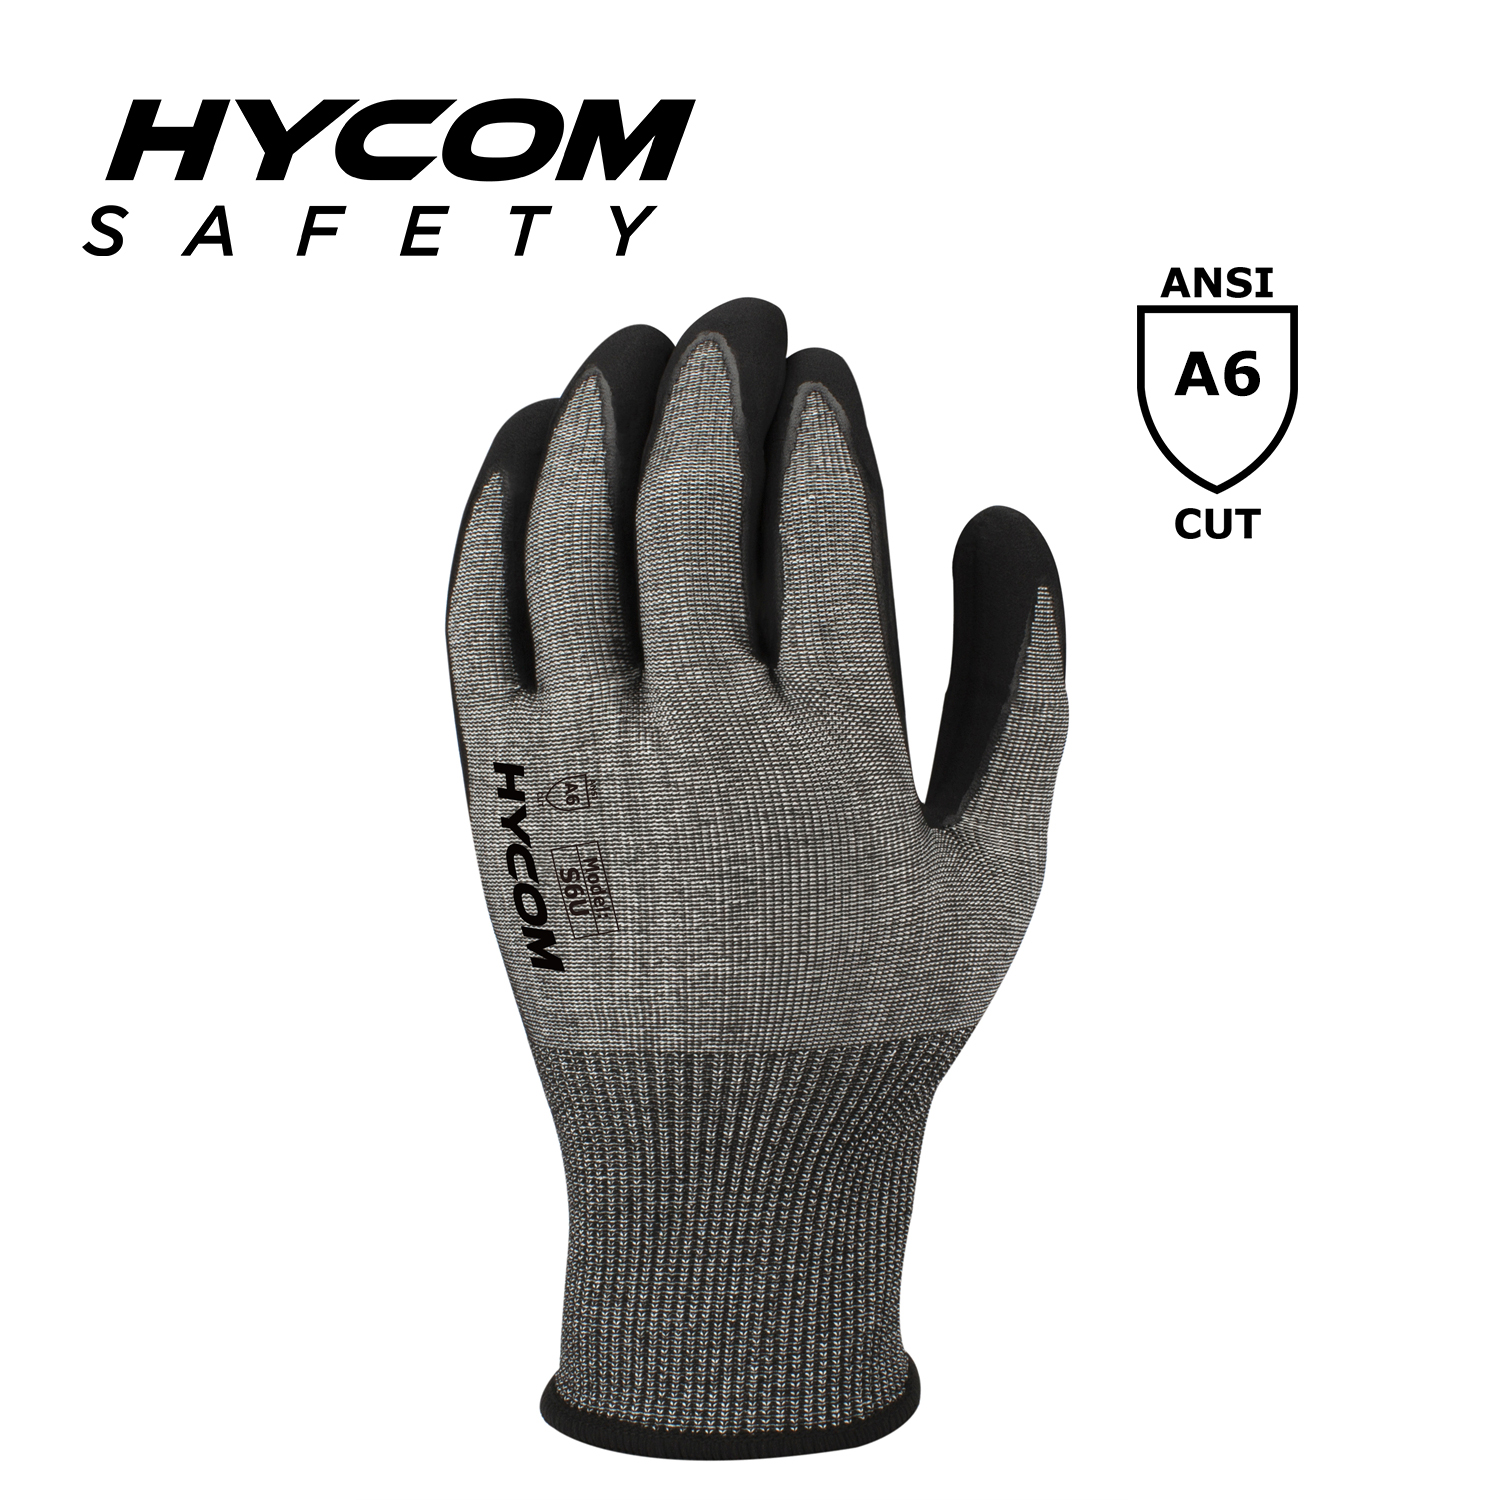 HYCOM 18G ANSI 6 Cut Resistant Glove with Palm Foam Nitrile Coating PPE Gloves